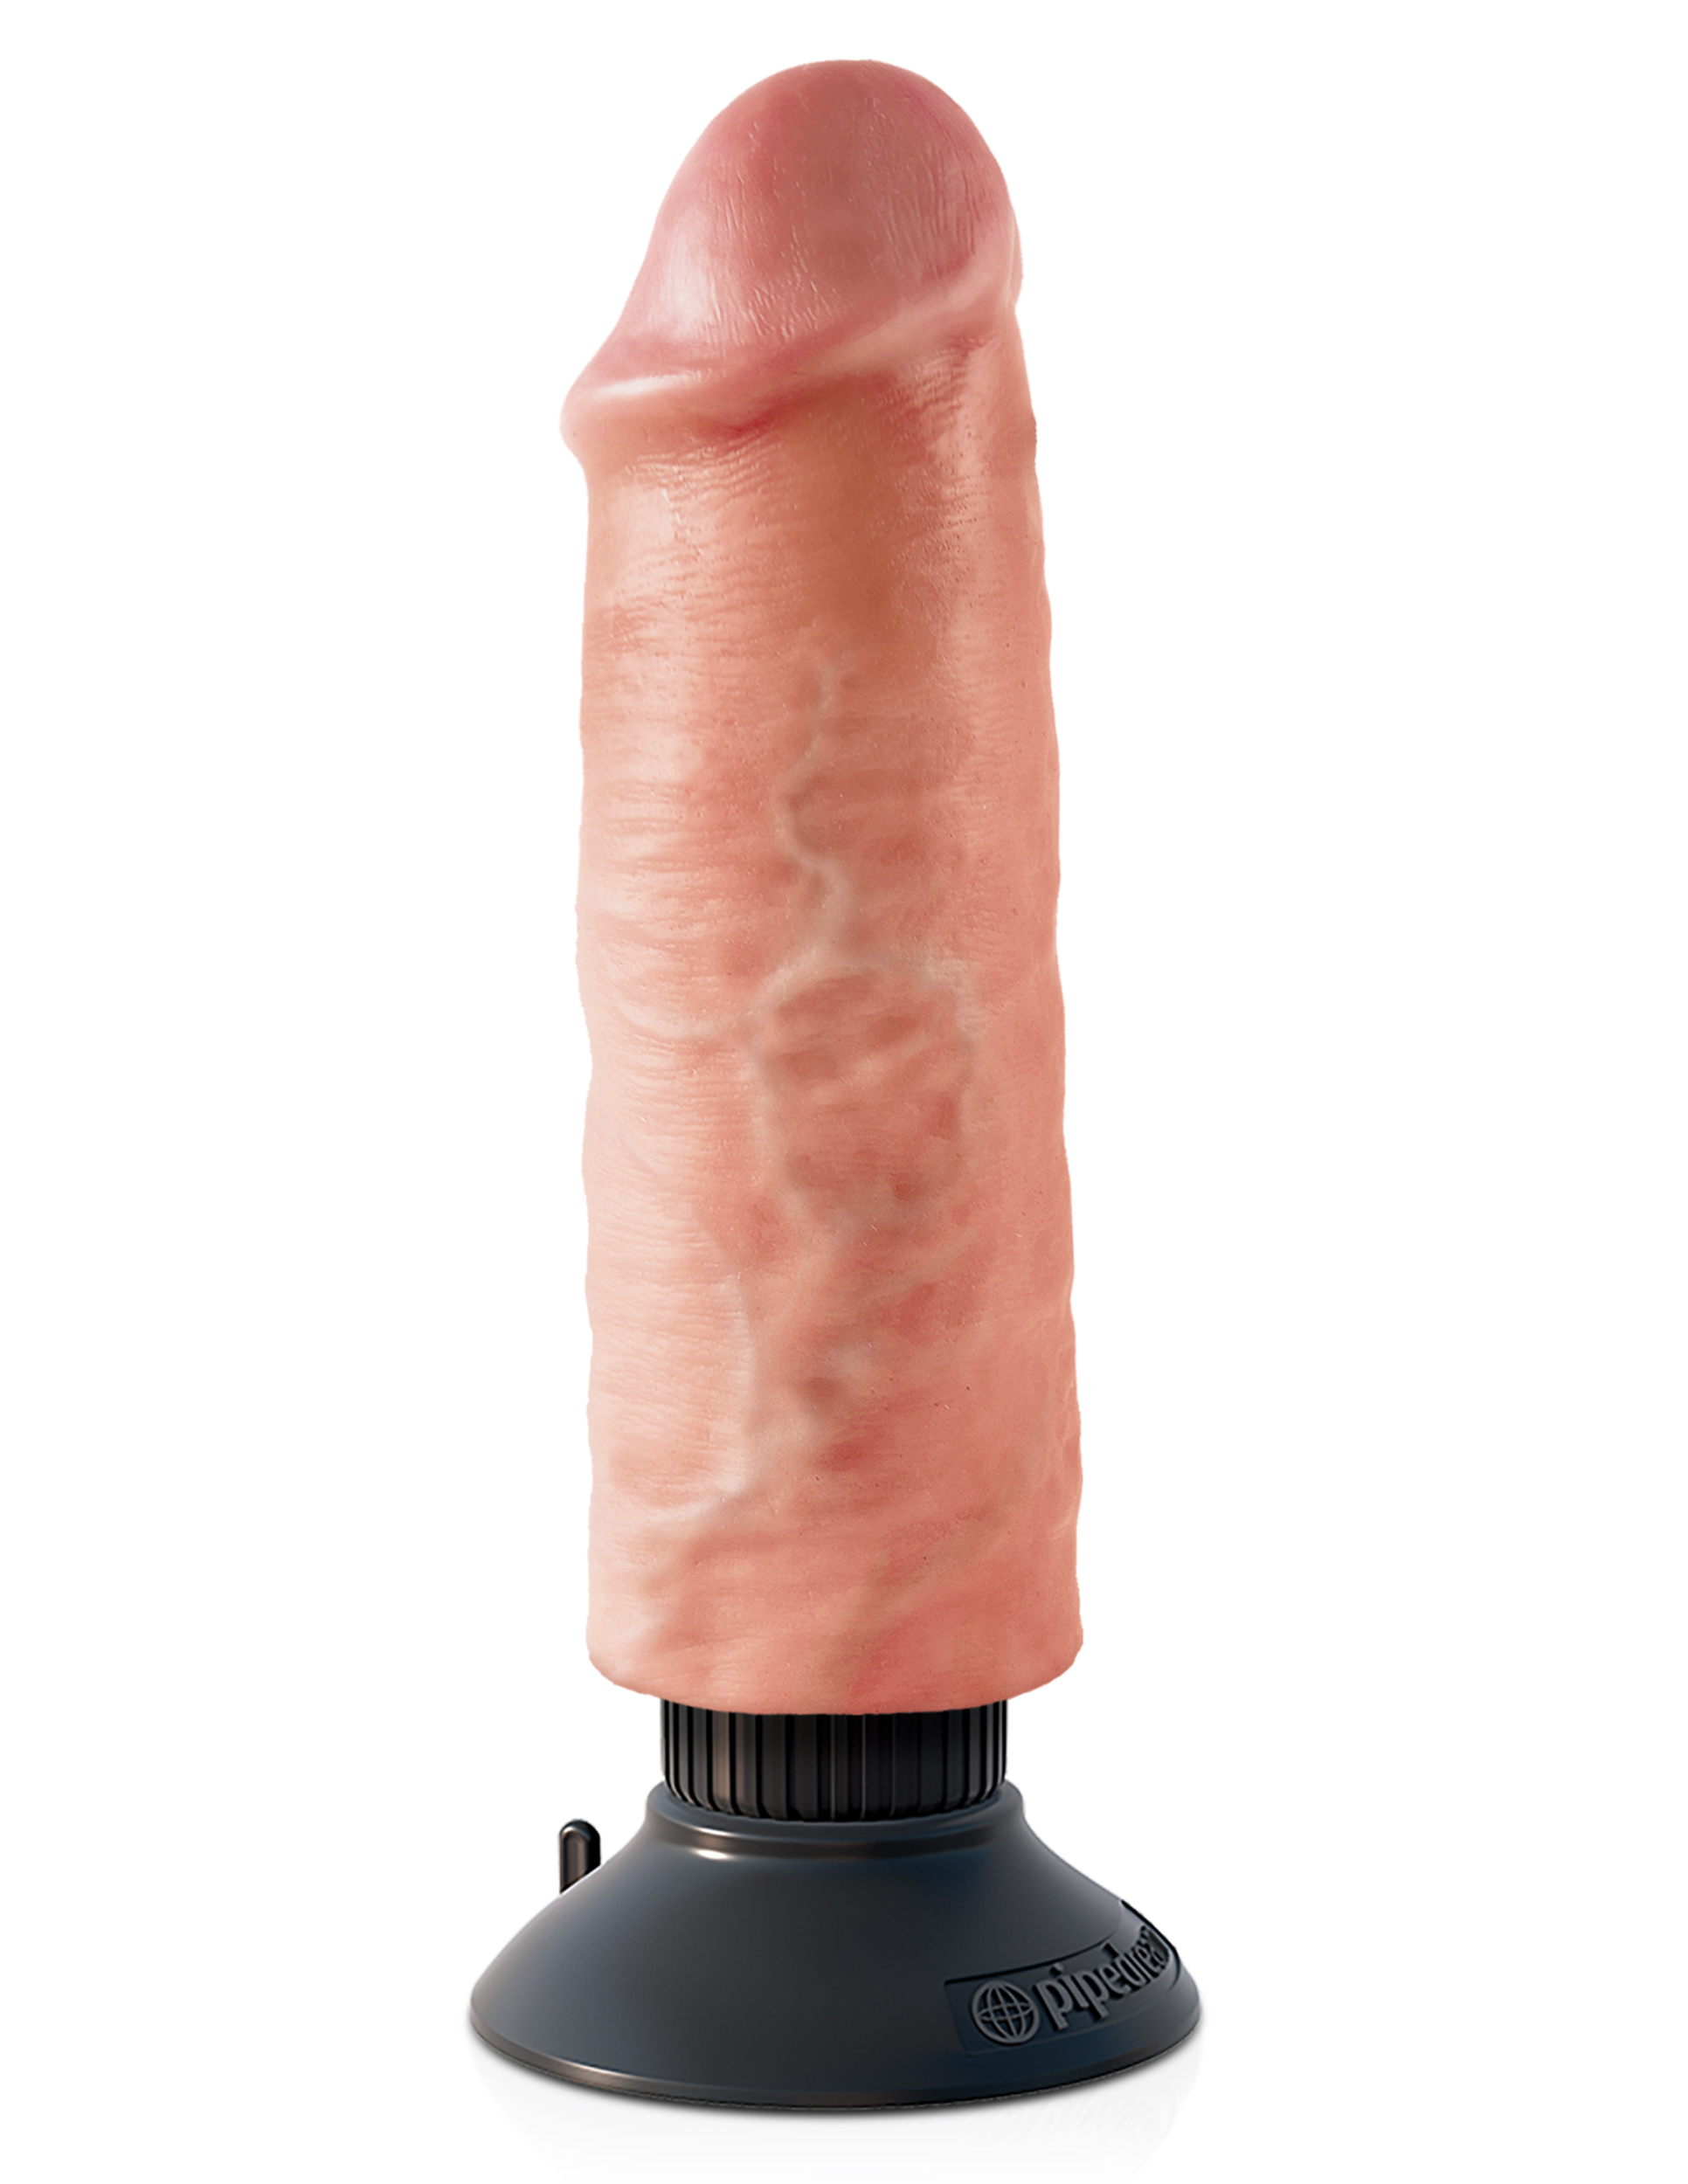 King+Cock+6+inch+Vibrating+Suction+Cup+Dildo